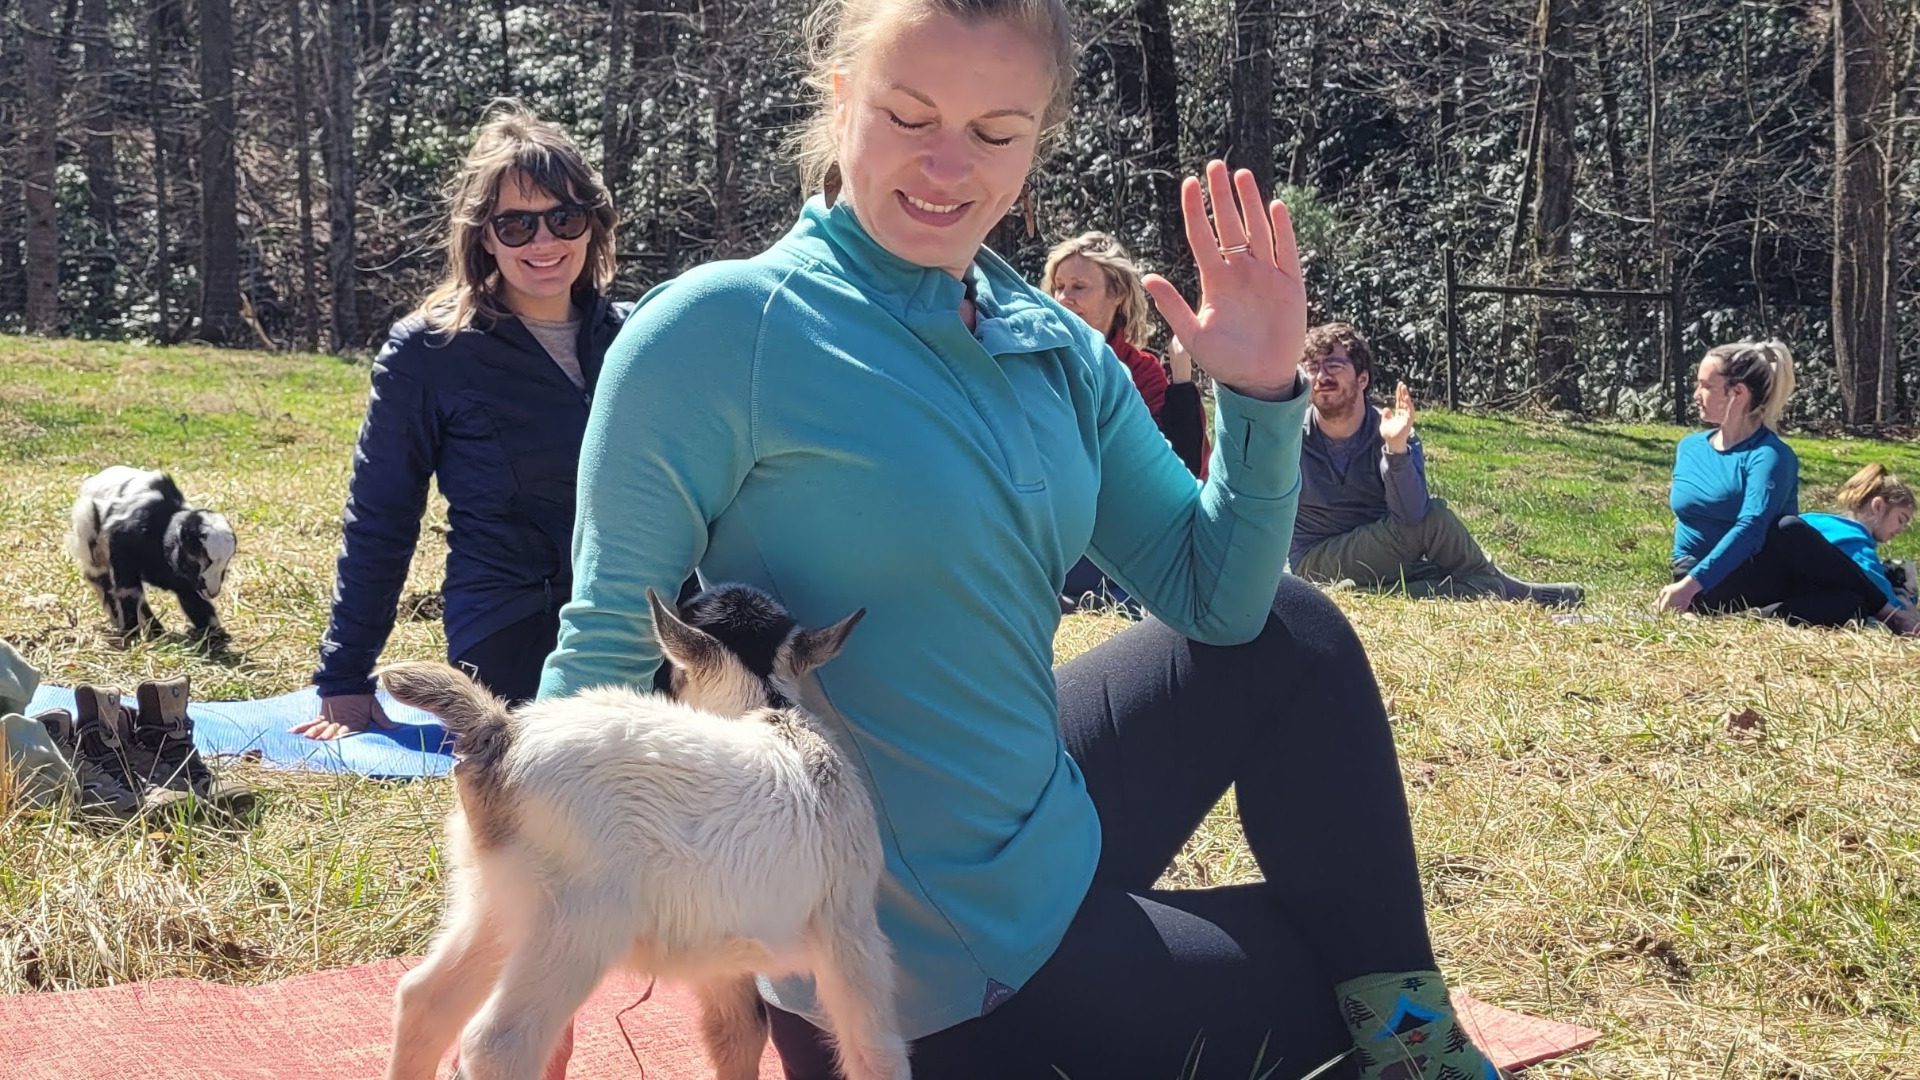 Curious baby goat approaches woman doing yoga.